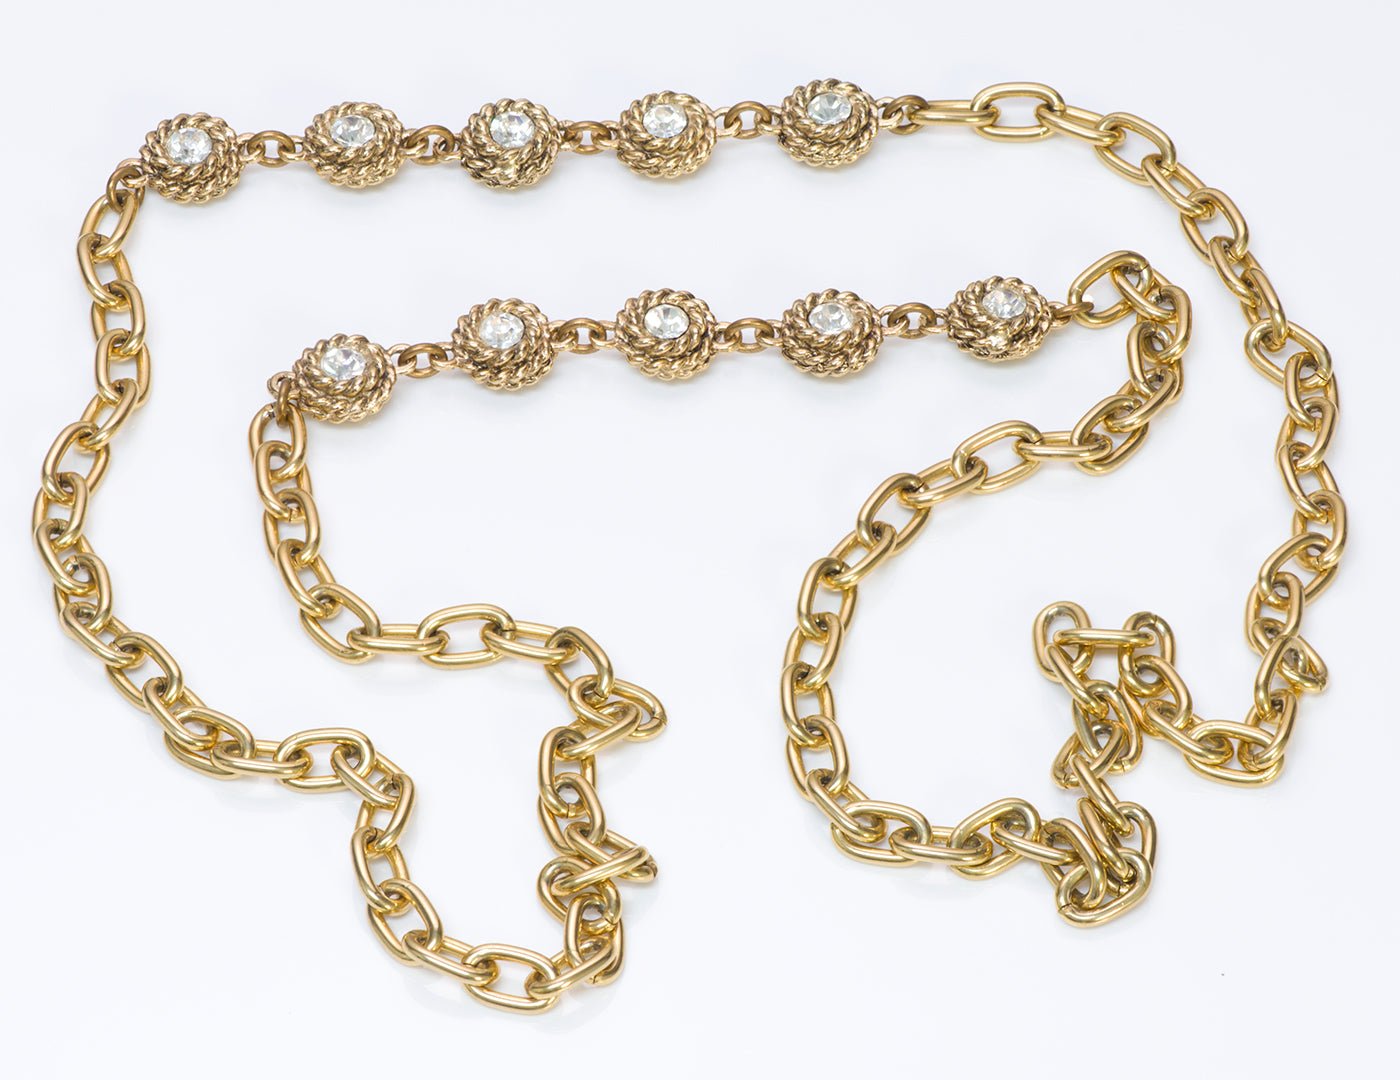 Chanel 1980’s Gold Tone Chain Camellia Crystal Necklace